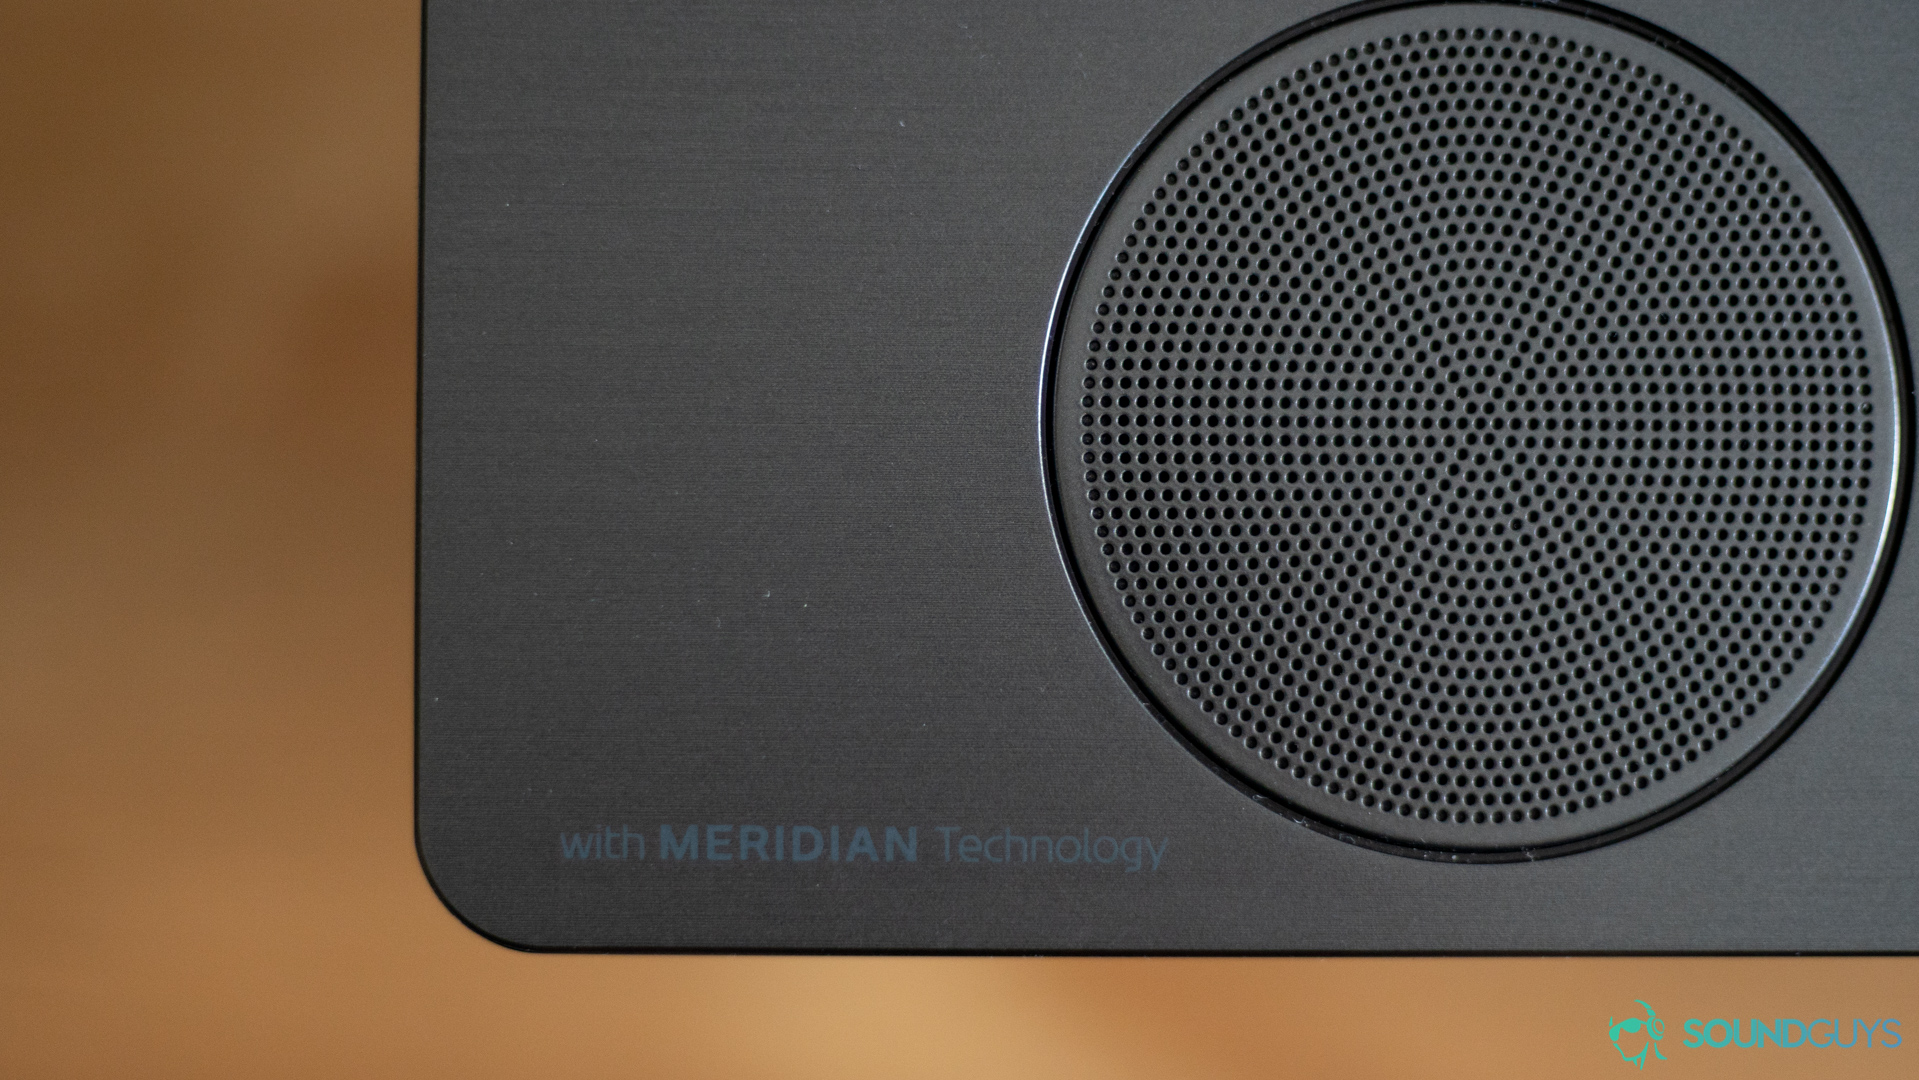 The Meridian Technology logo on the LG SK10Y